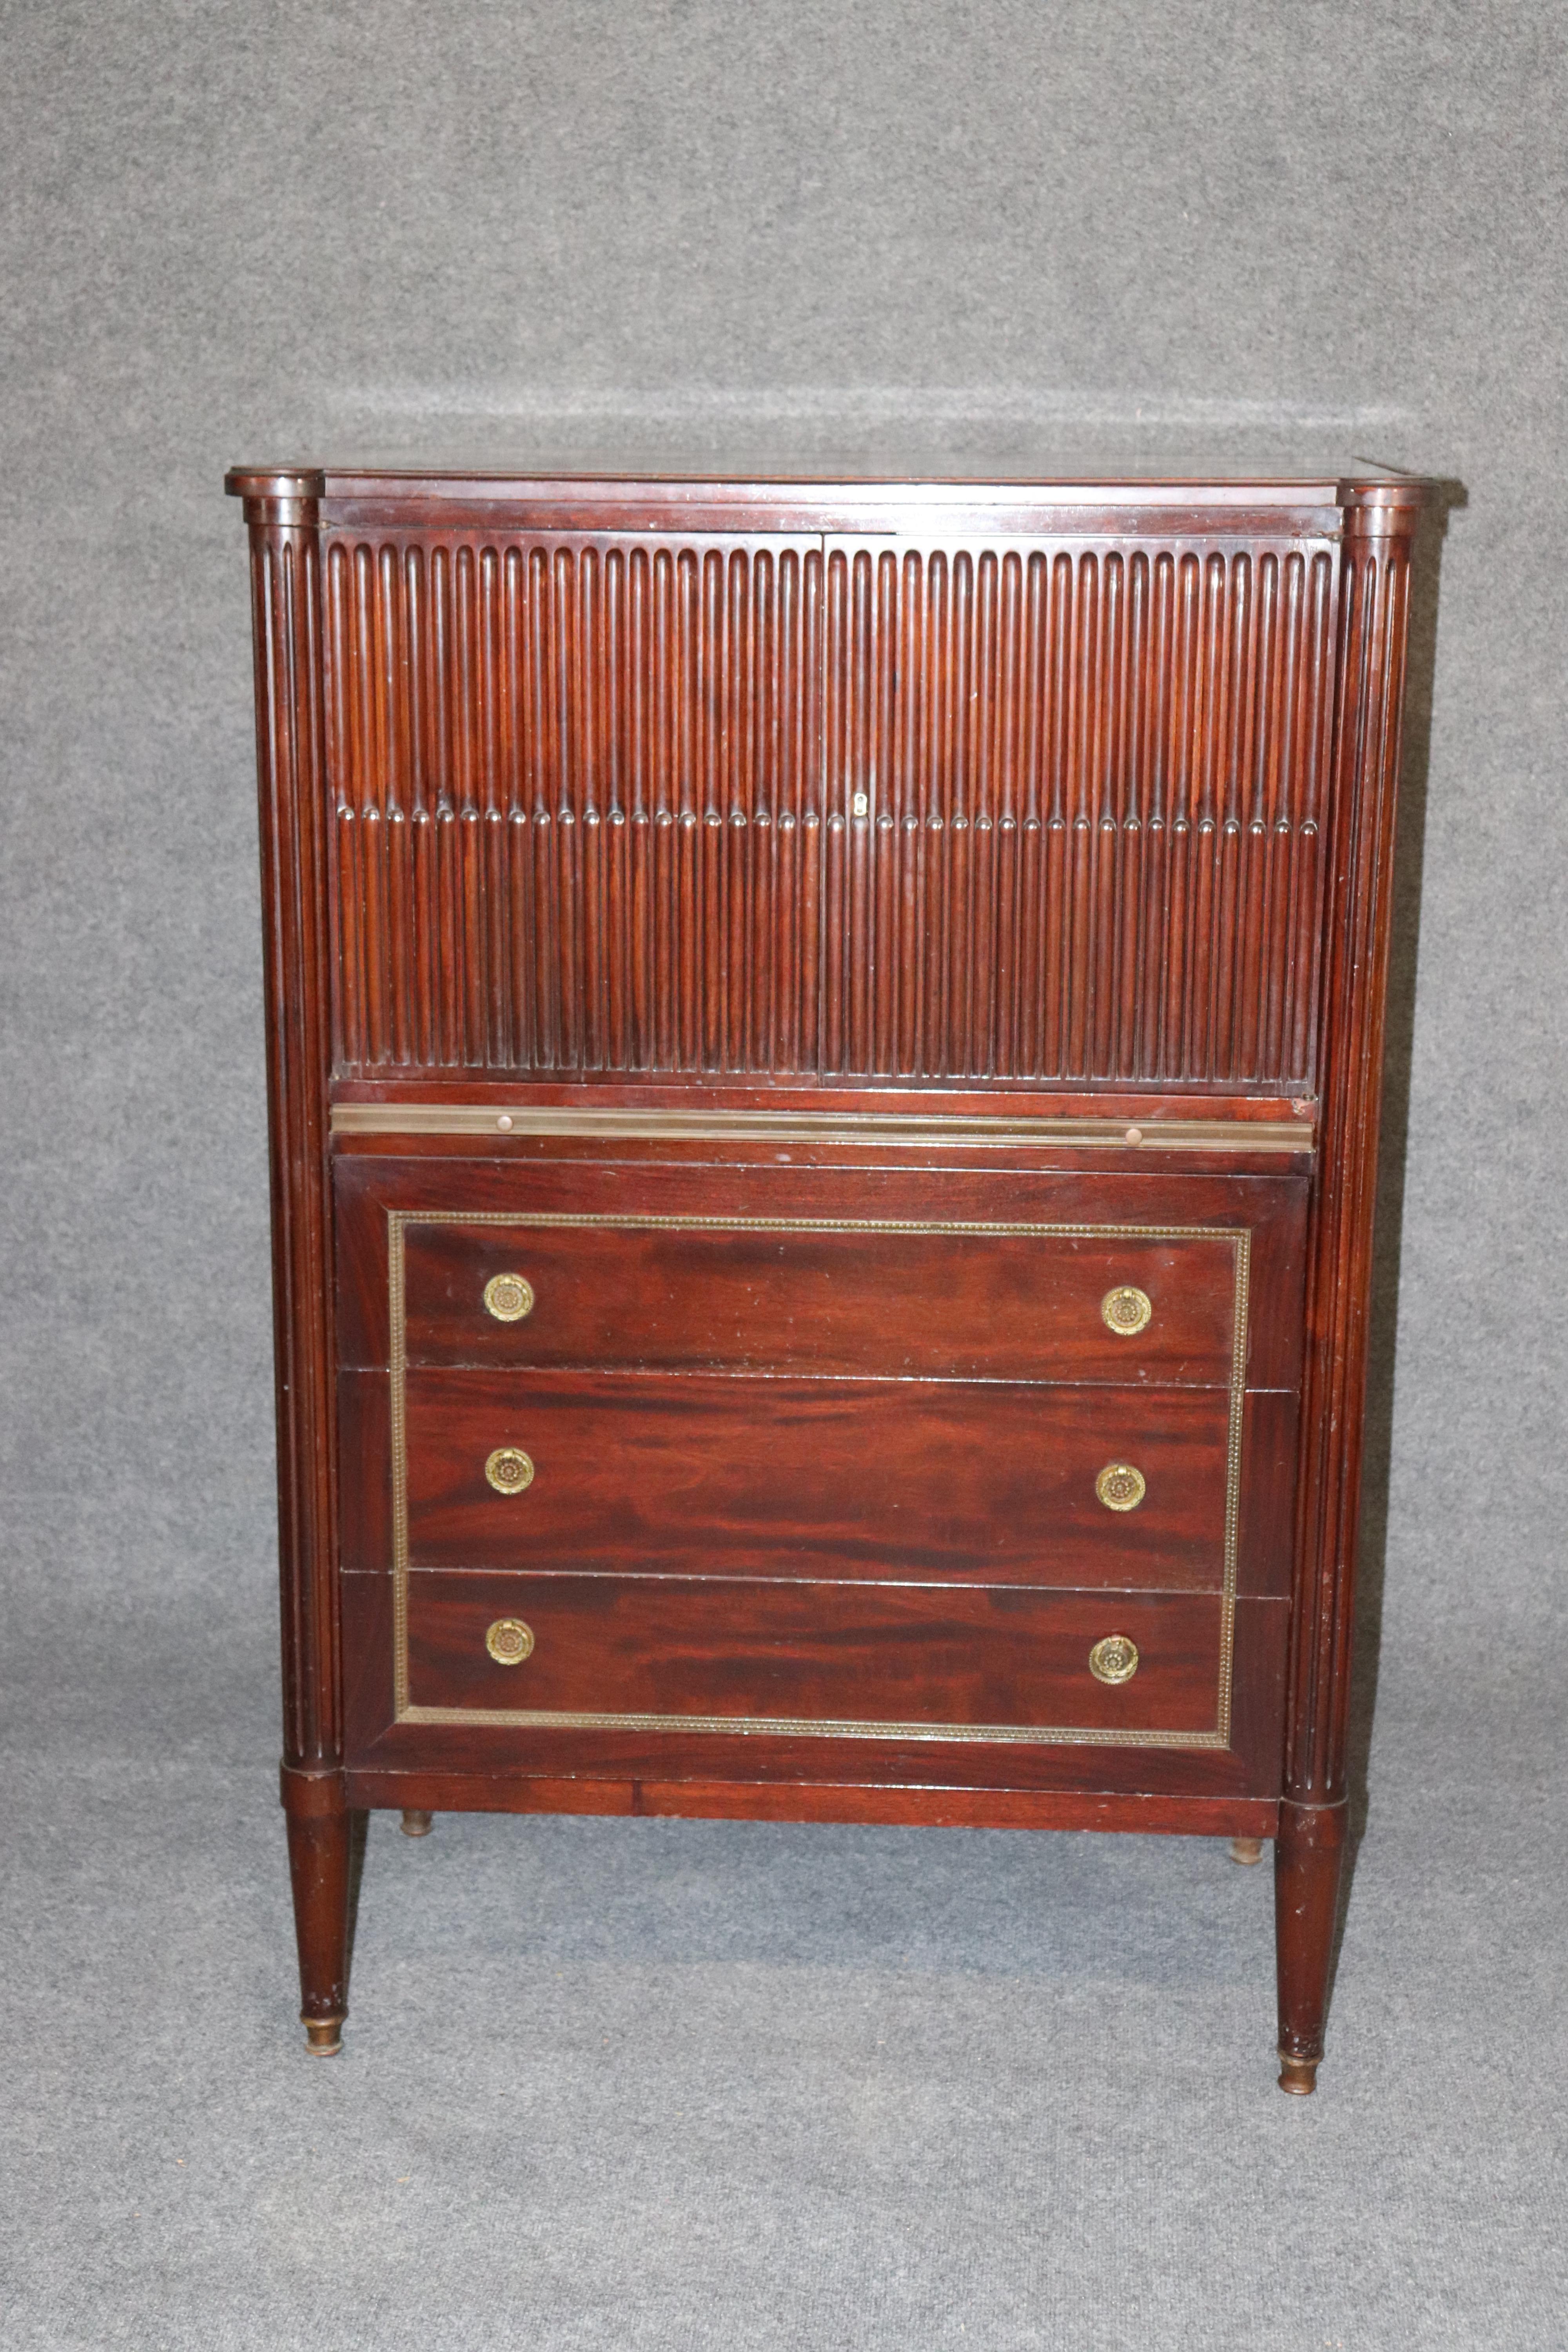 This is a gorgeous and well made French Directoire style Dresser made in the 1940s era. It features a gold tooled leather embossed pull out tray for neckties and cufflinks. The dresser also has brass trim and sophisticated lines. Measures 52.75 tall